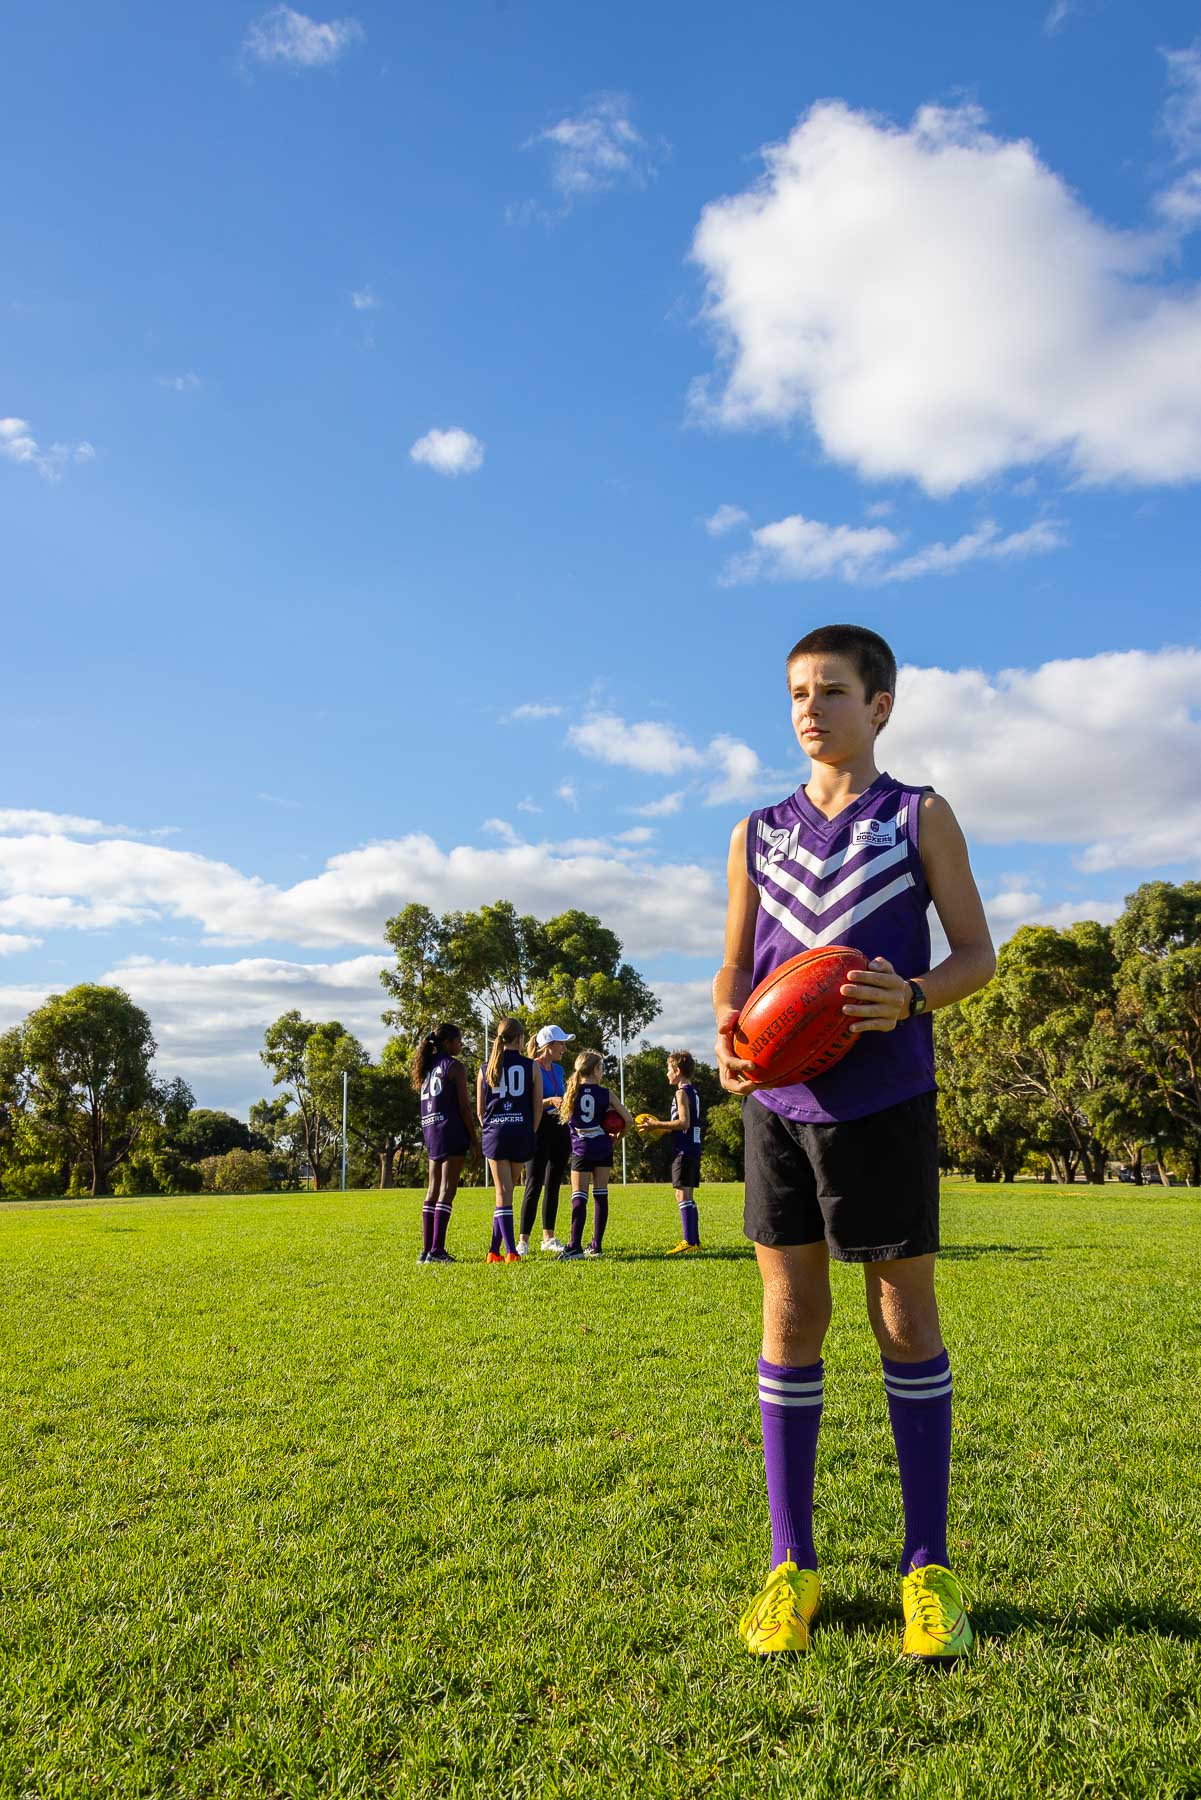 vertical image of one boy holding a red AFL football with teammates small in background